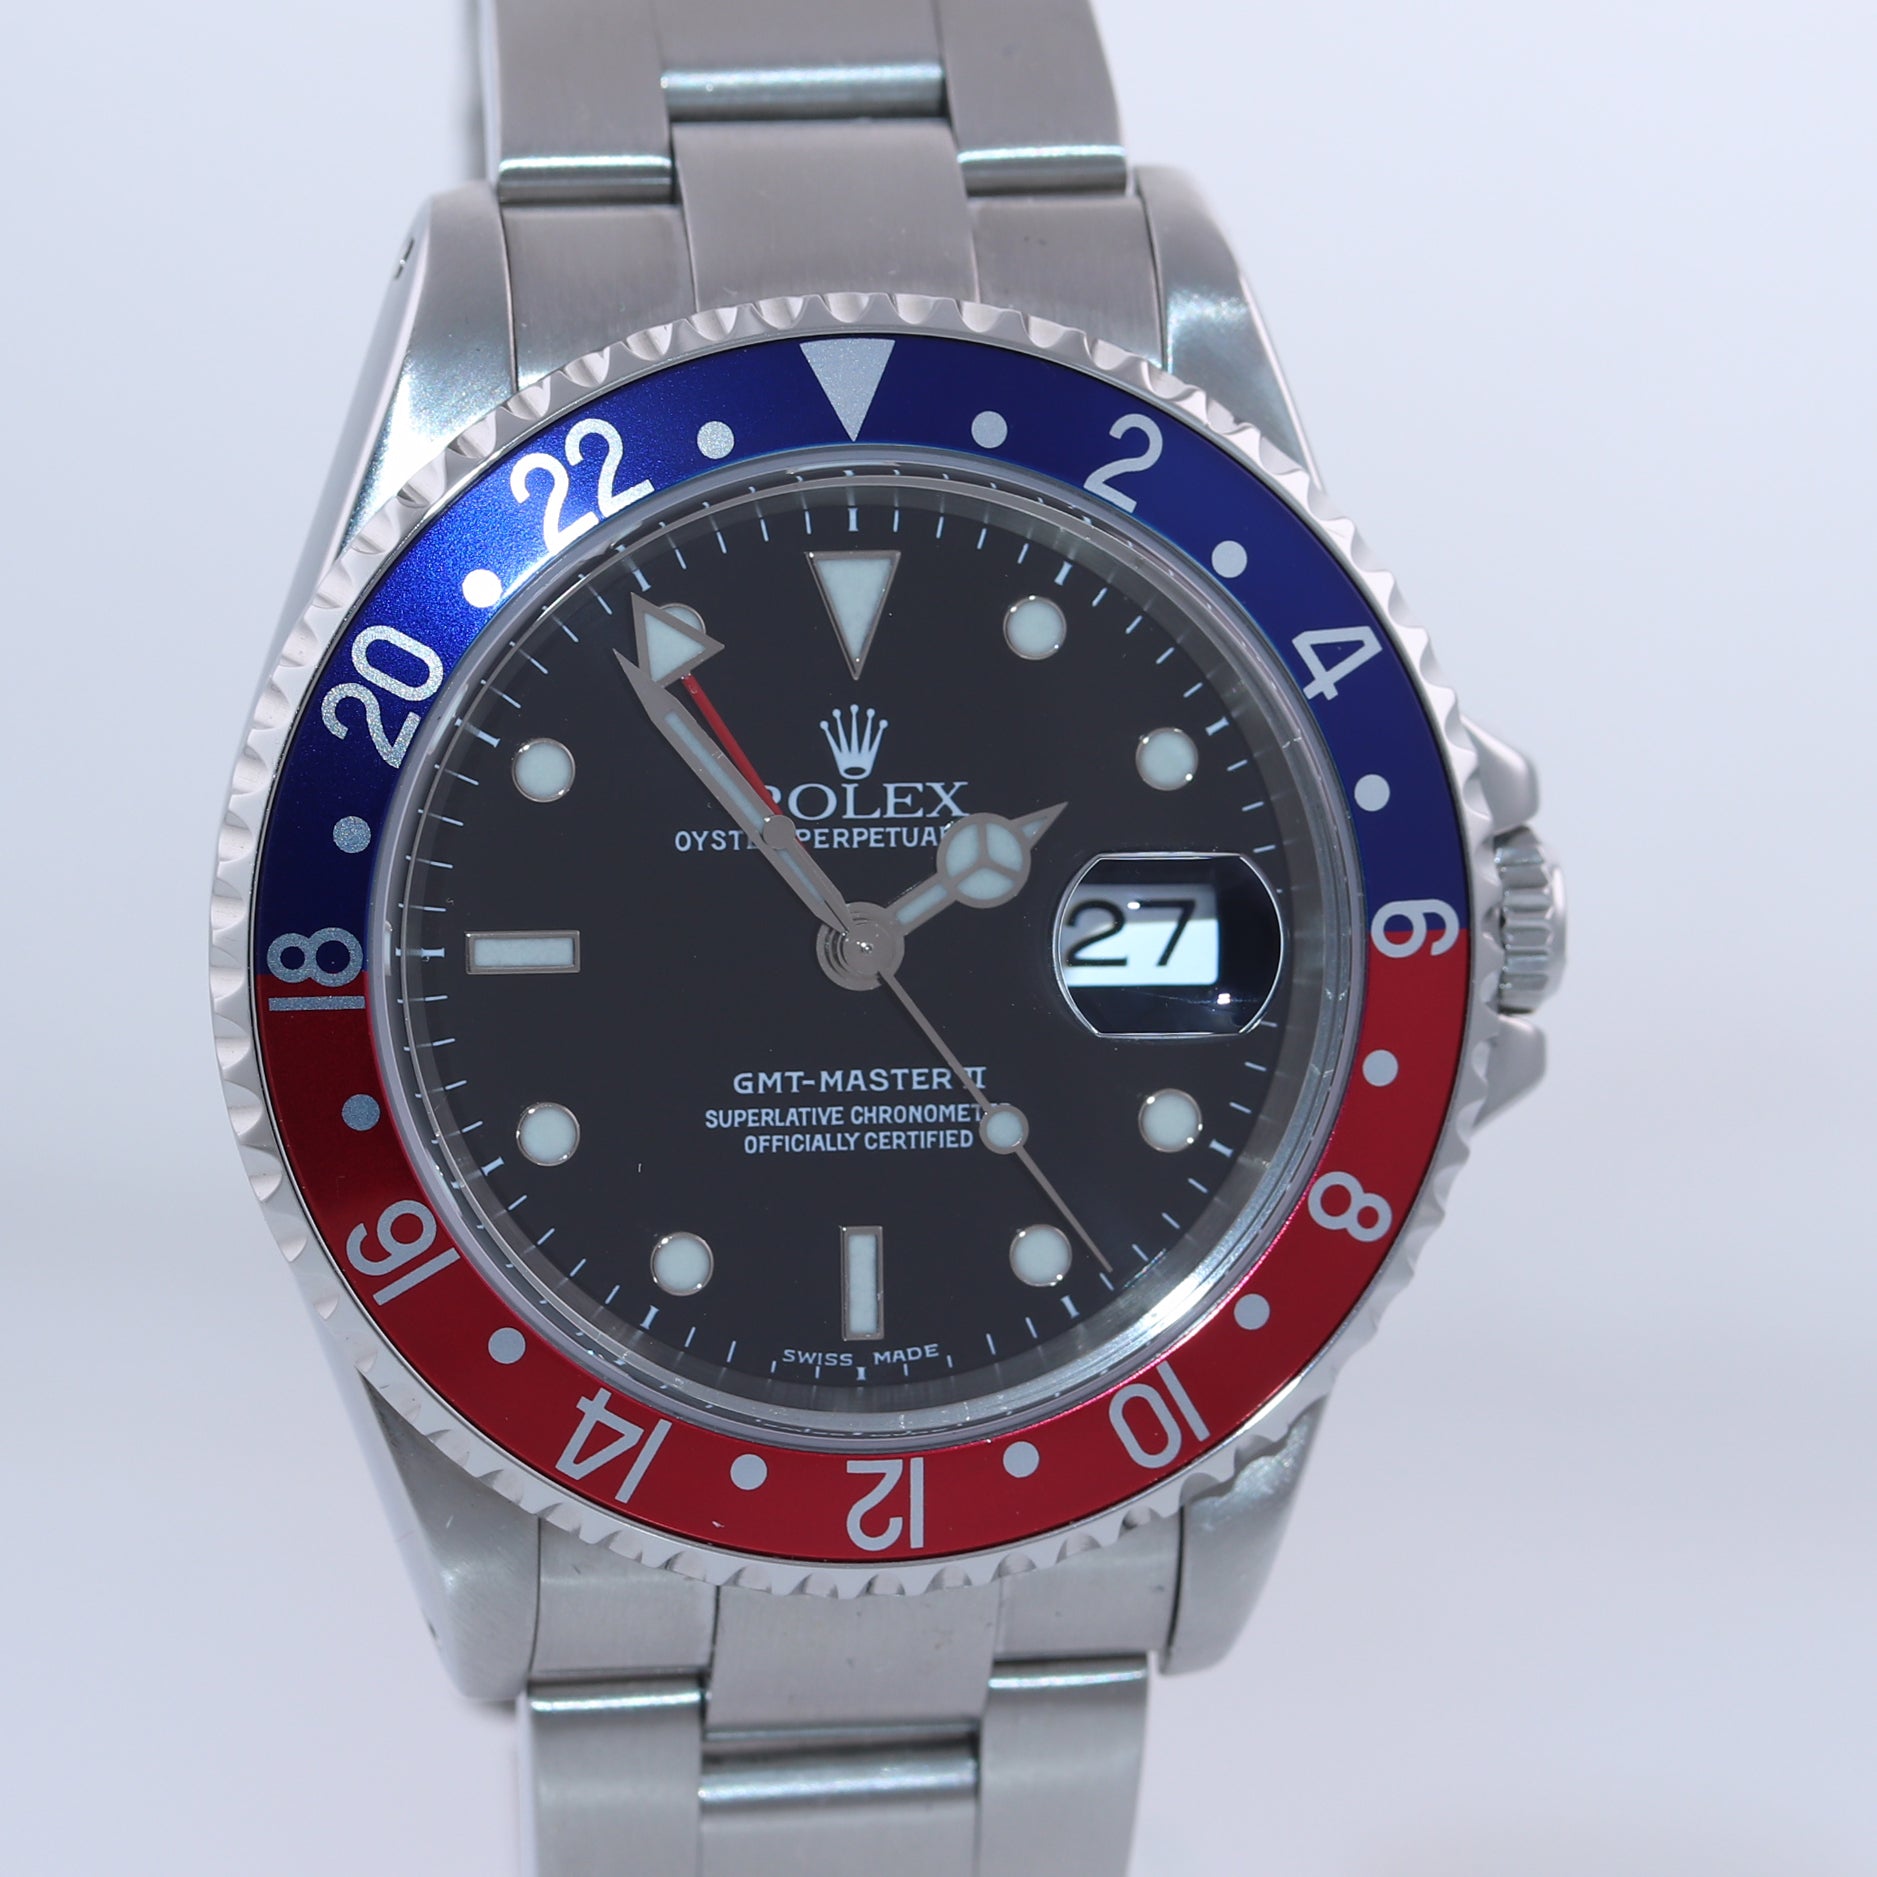 MINT 2000 Rolex GMT-Master 2 16710 PEPSI Blue Red Steel Oyster 40mm Watch Box